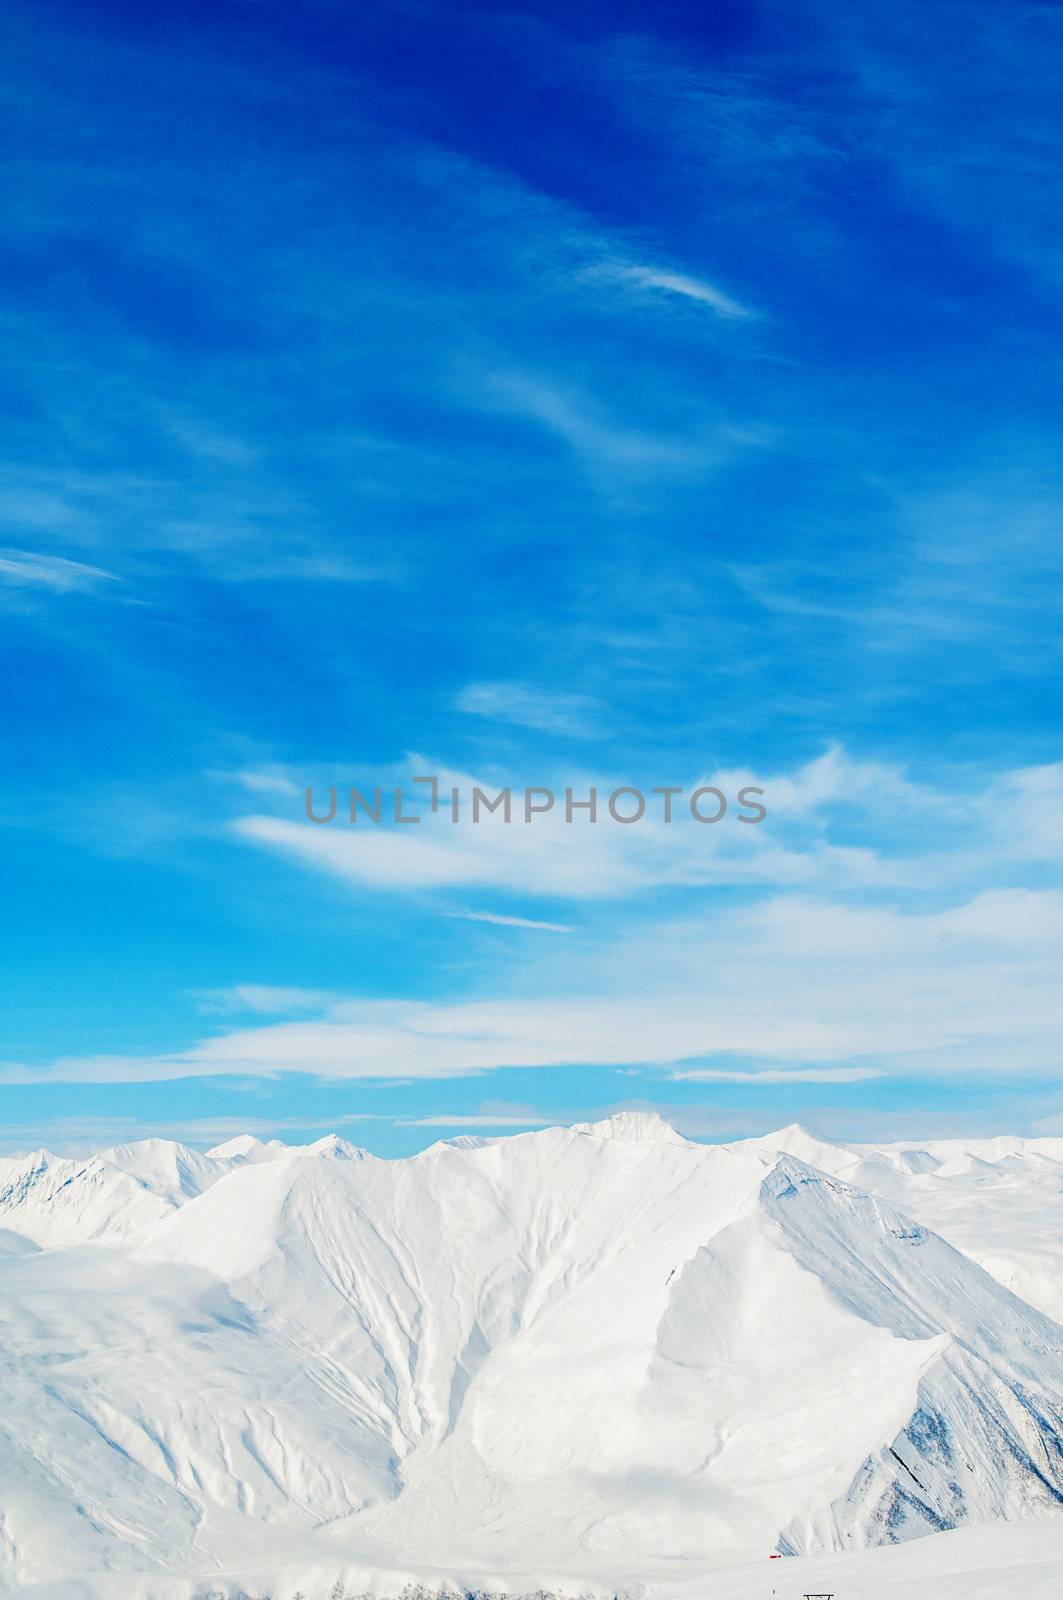 Snow mountains on bright winter day